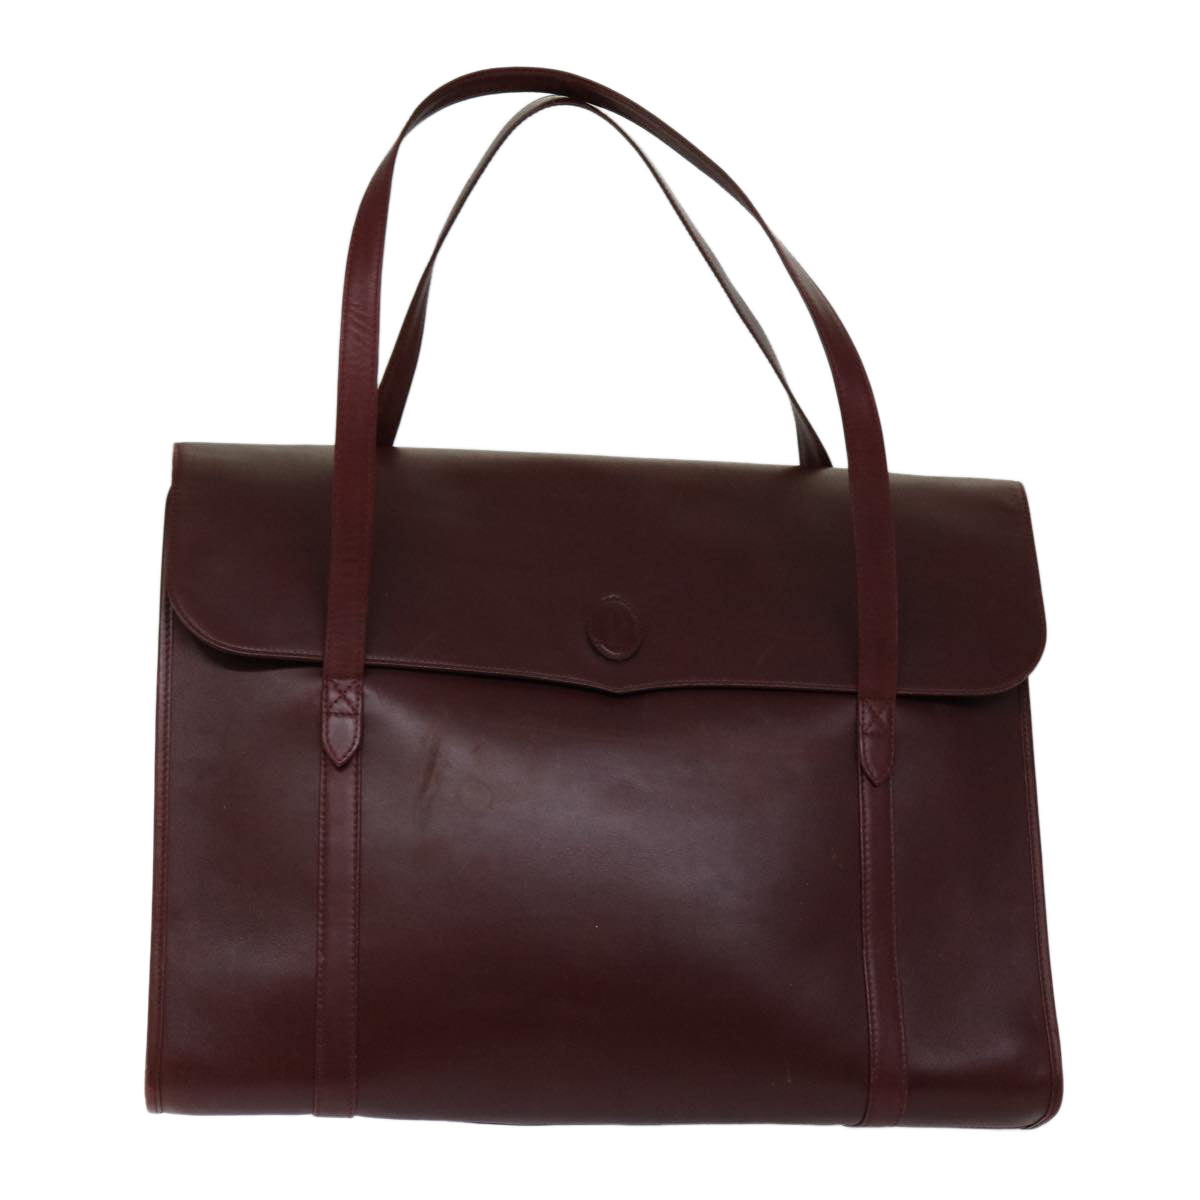 CARTIER Hand Bag Leather Bordeaux Wine Red Auth bs12863 - 0